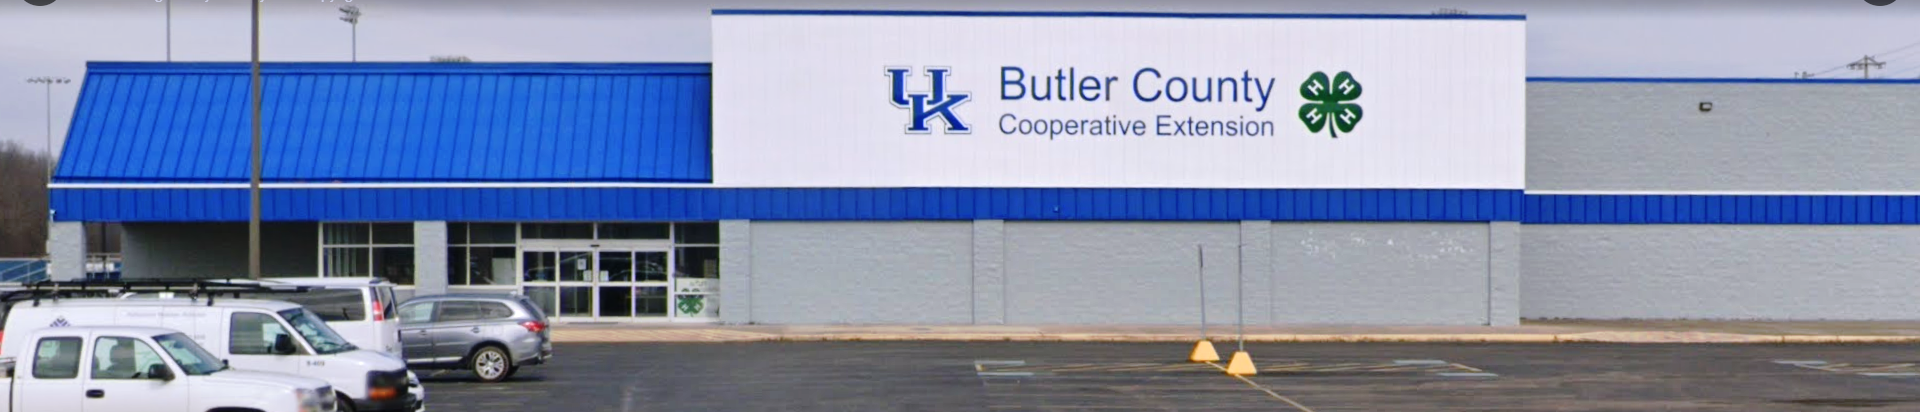 Butler County Extension Service Building